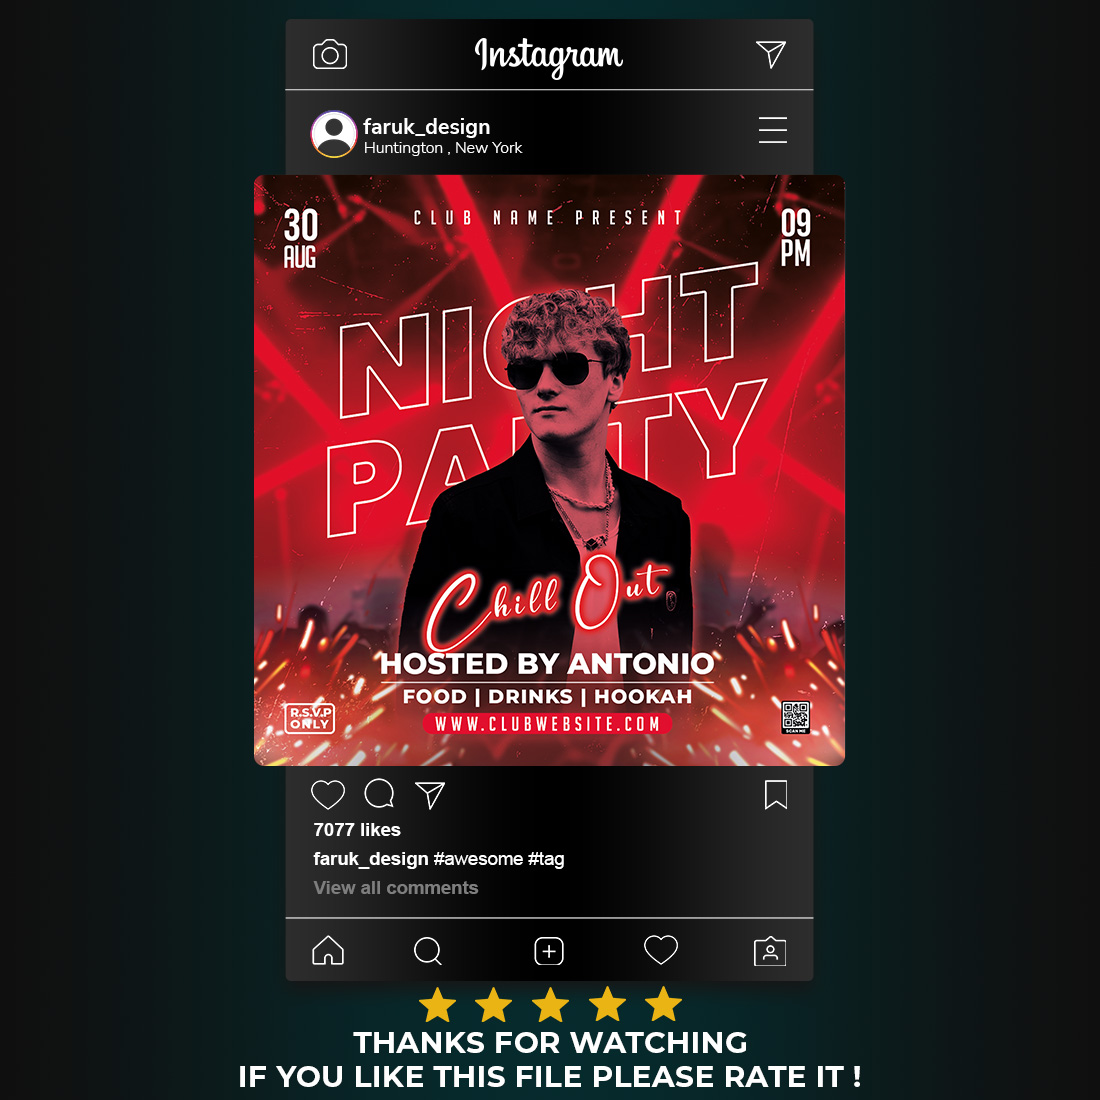 DJ Party Flyer Social Media Post preview image.